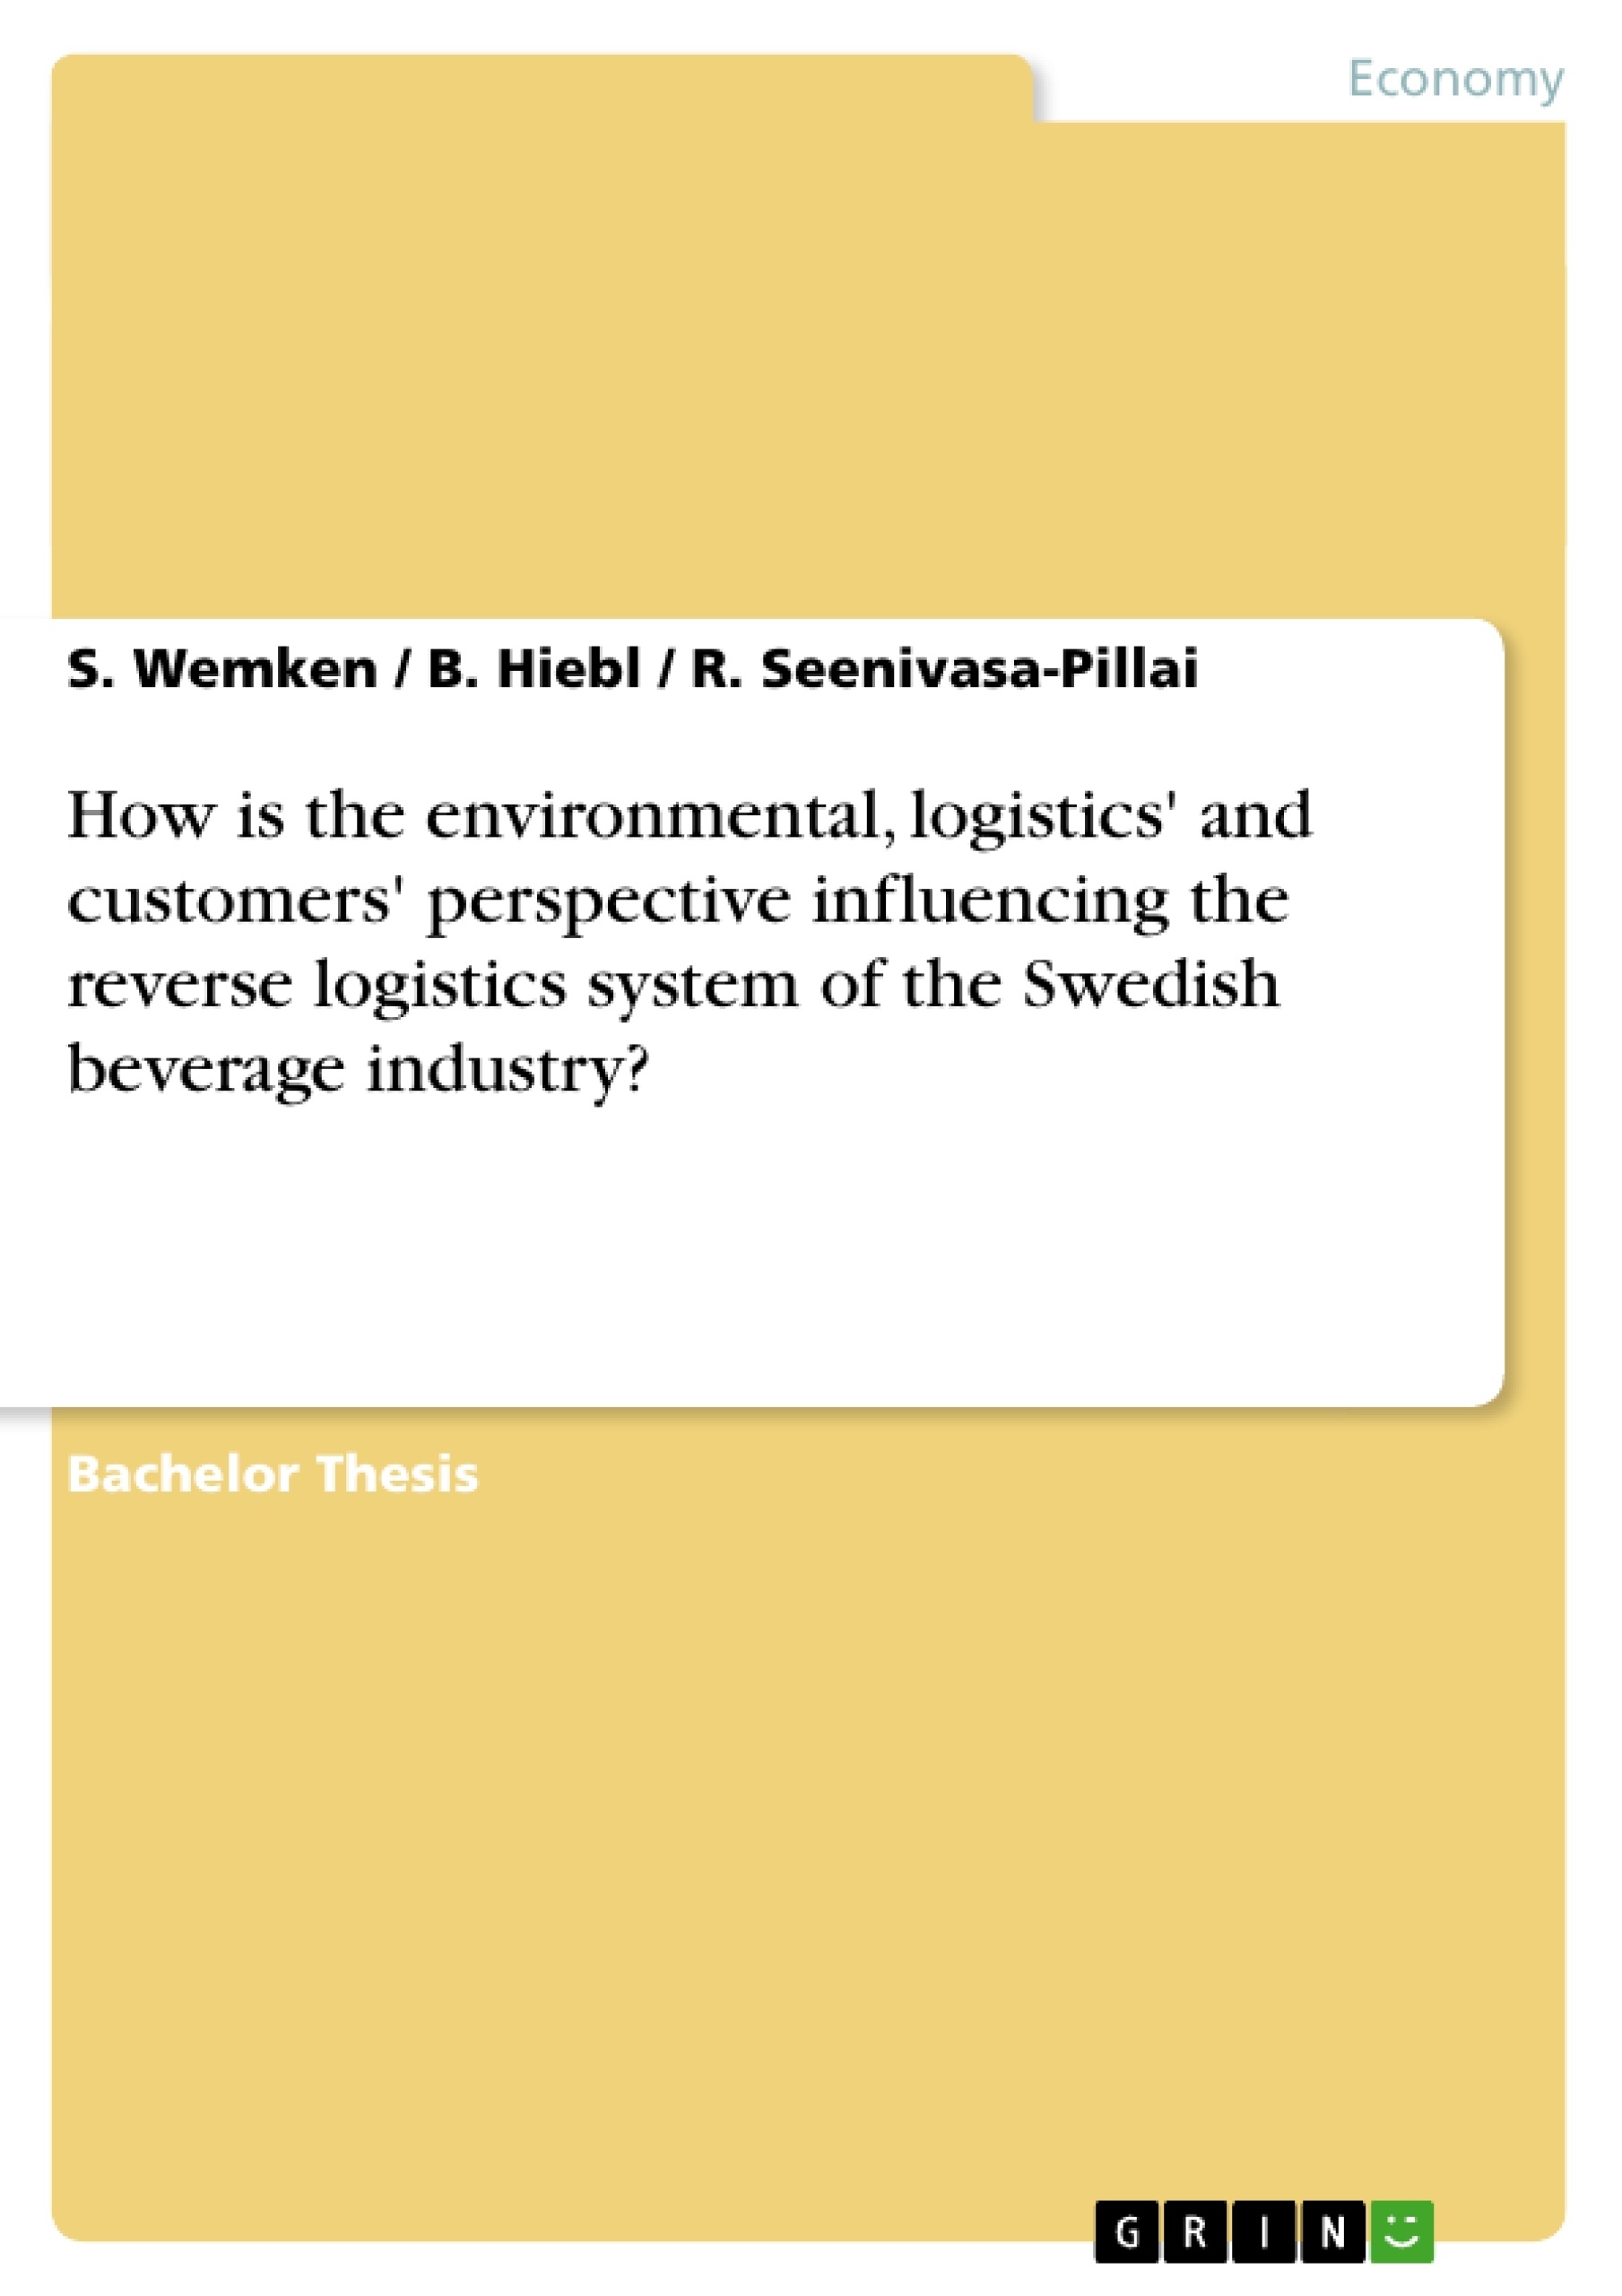 Titre: How is the environmental, logistics' and customers' perspective influencing the reverse logistics system of the Swedish beverage industry?